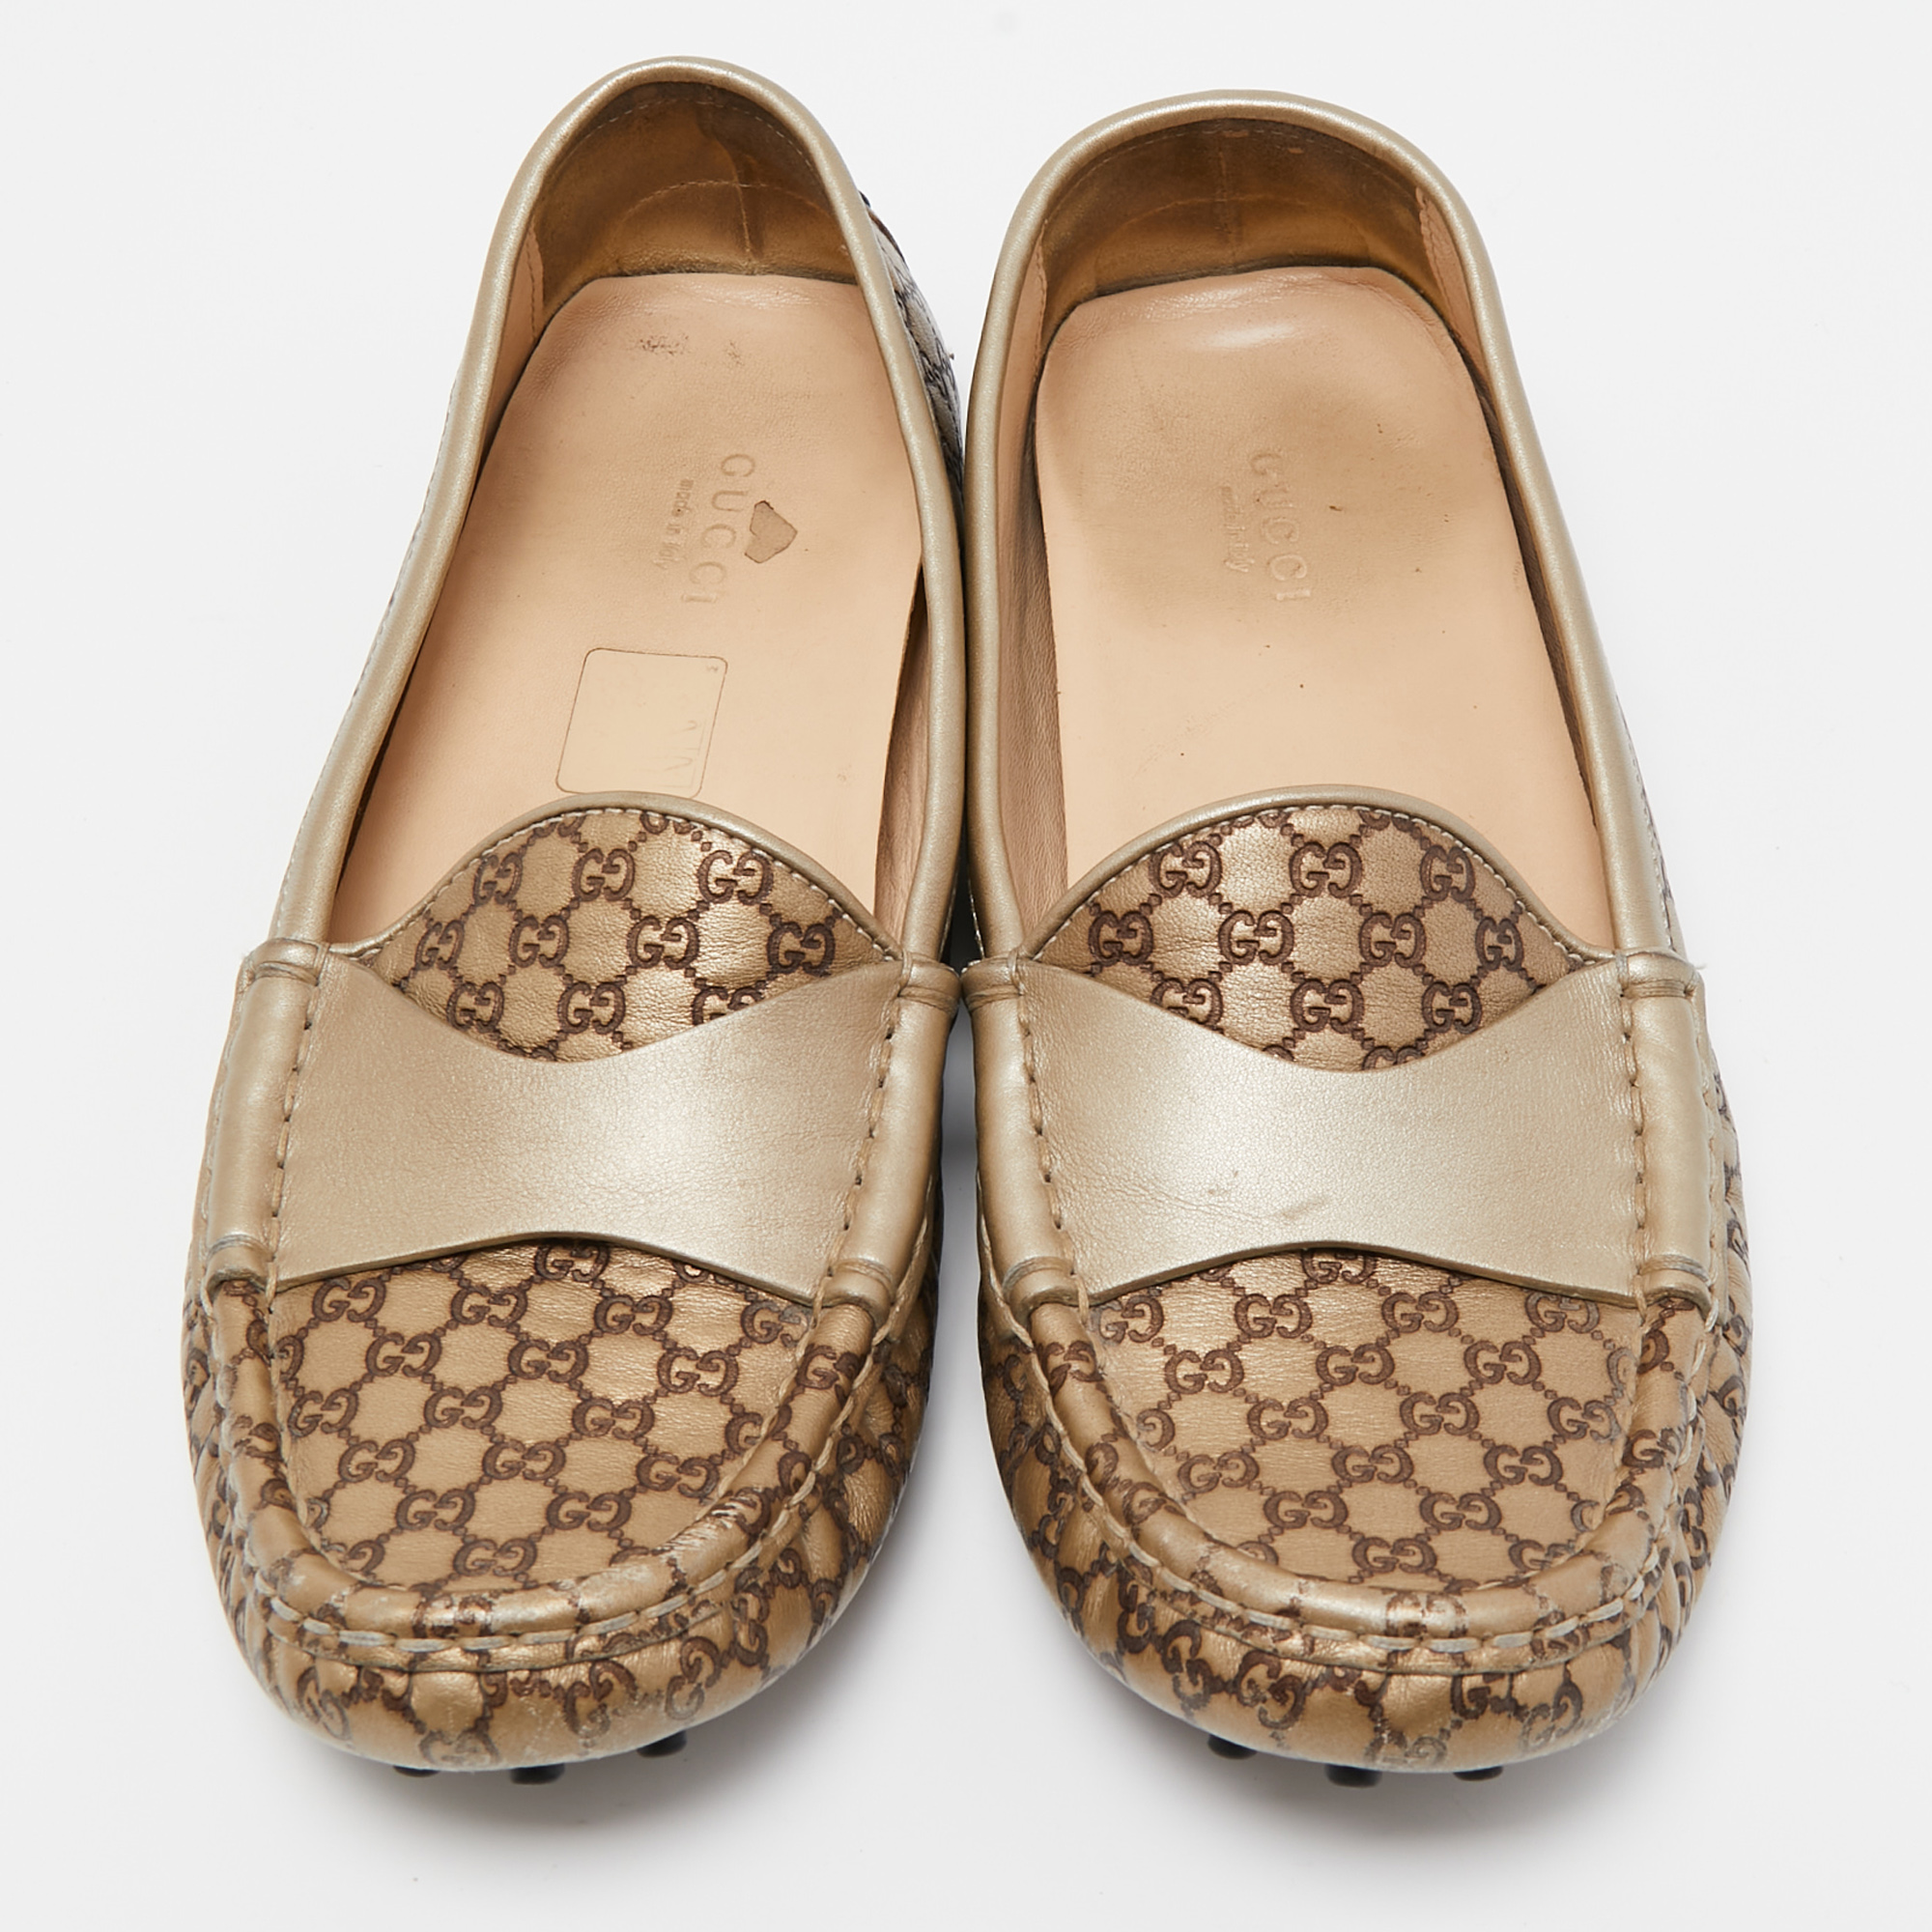 Gucci Metallic/Brown Leather Slip On Loafers Size 38